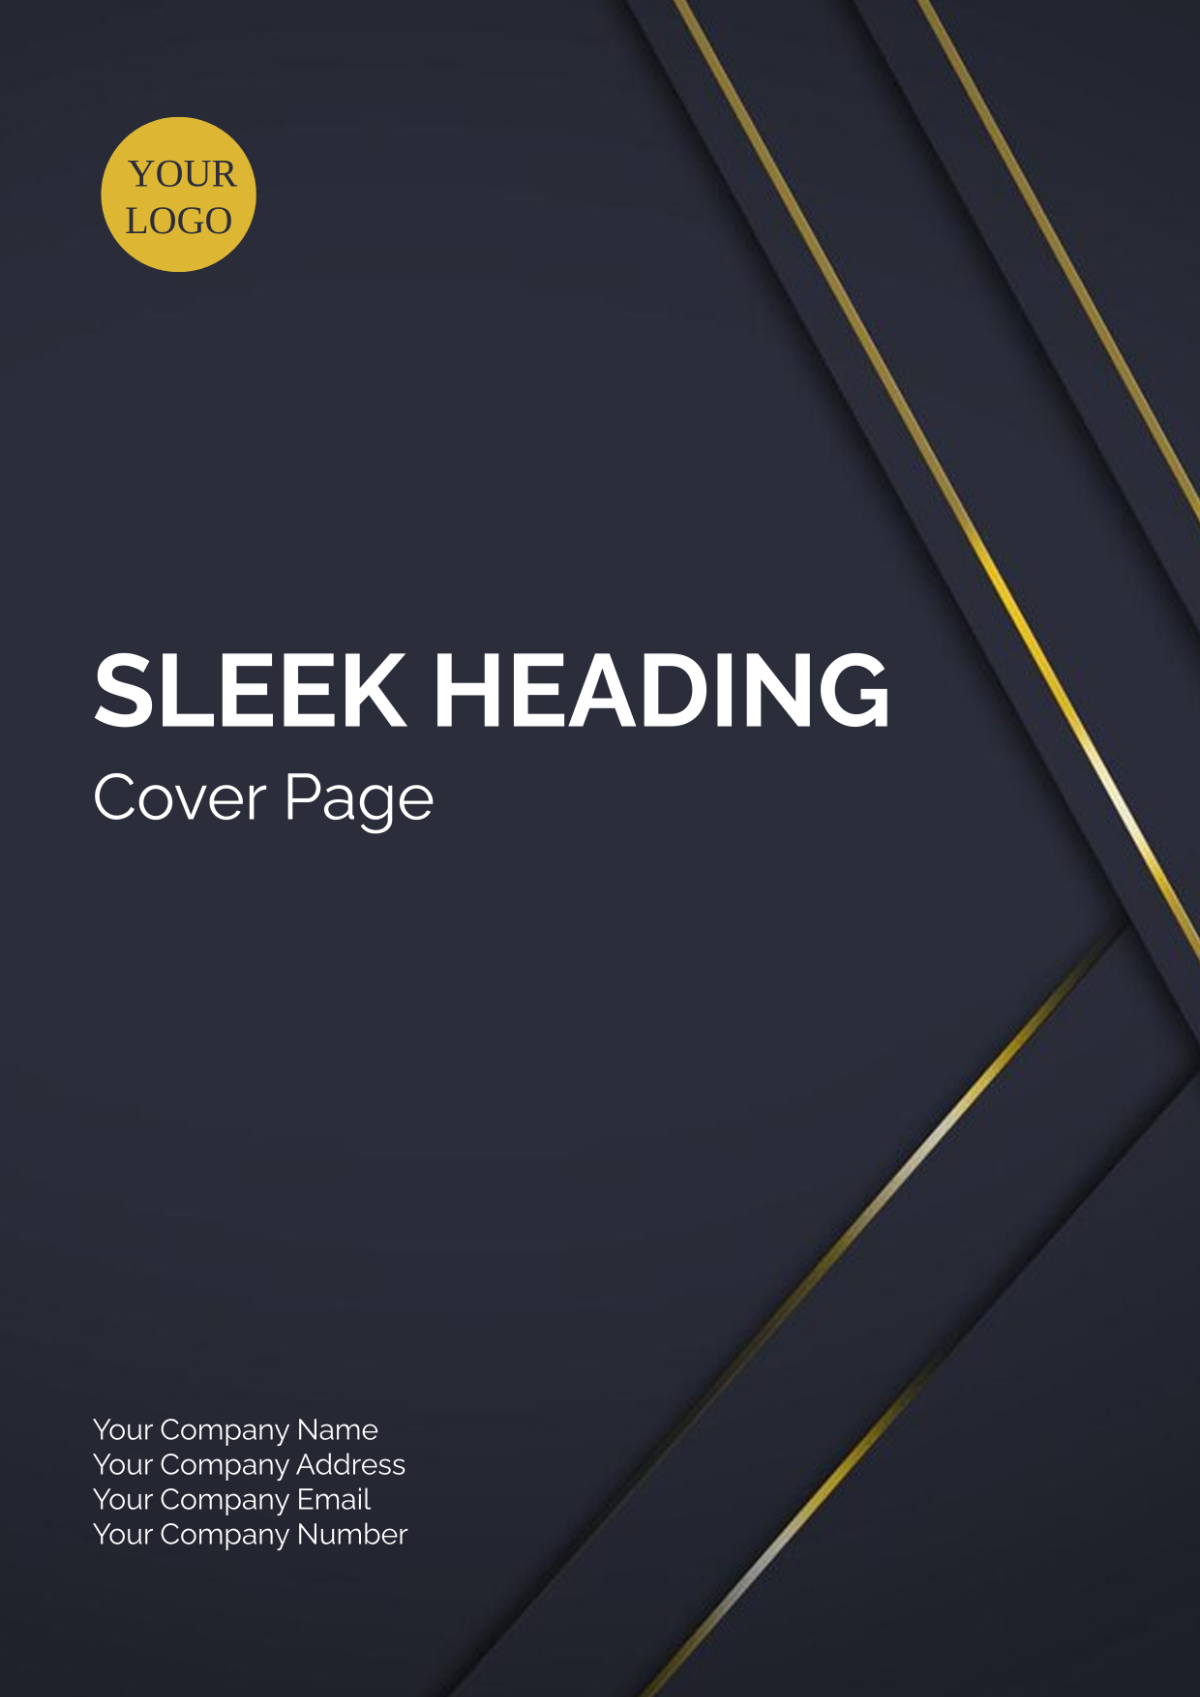 Sleek Heading Cover Page